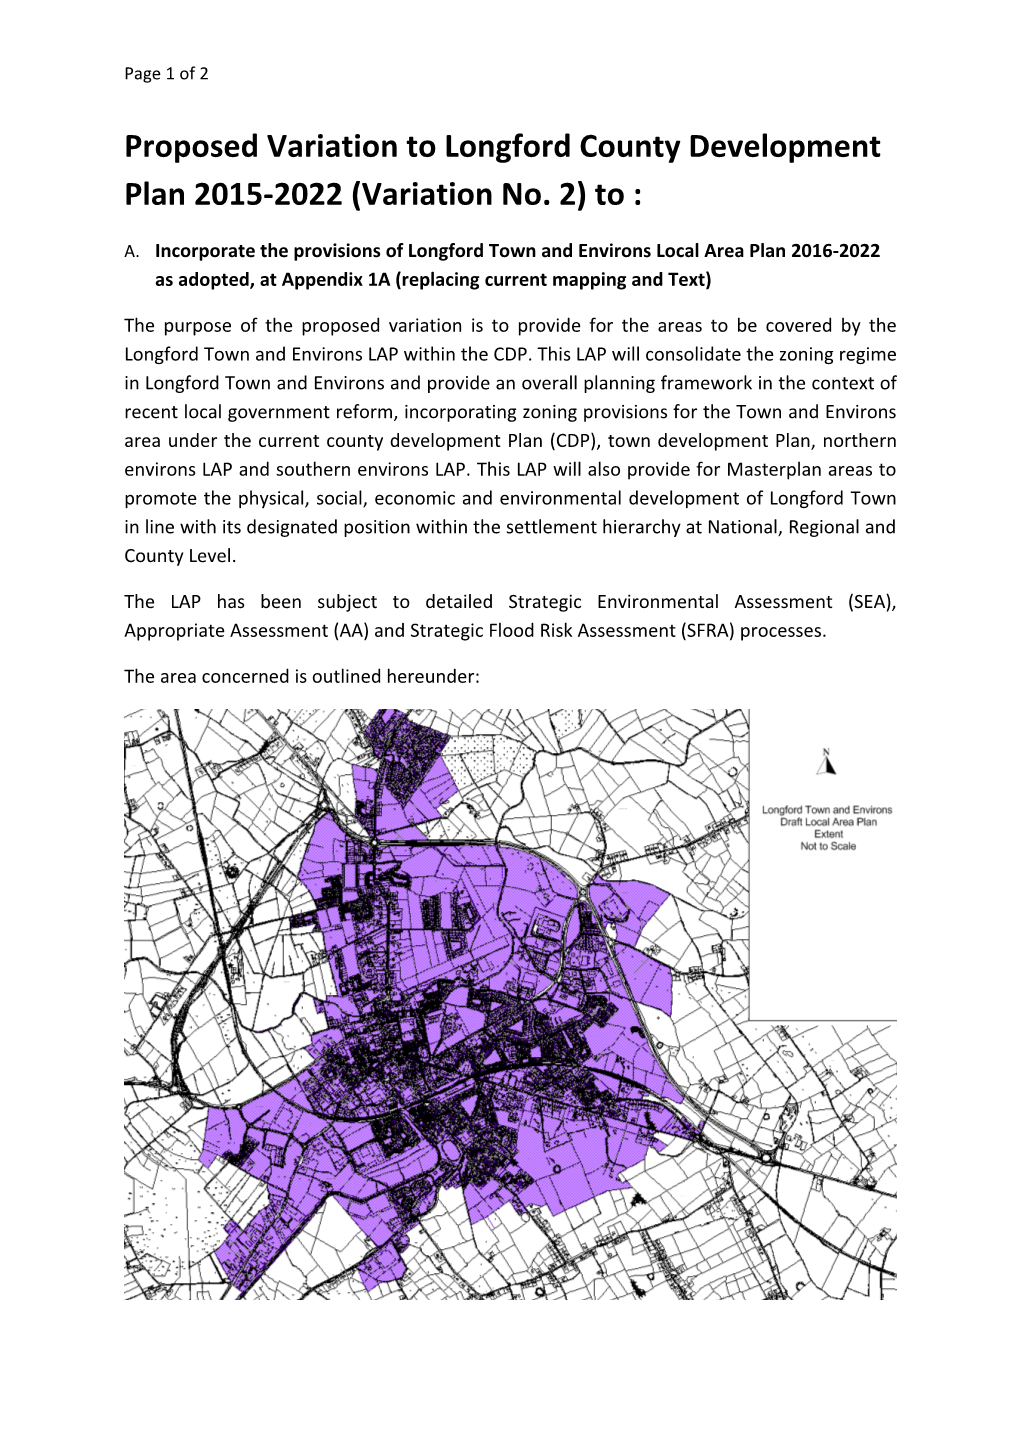 Proposed Variation to Longford County Development Plan 2015-2022(Variation No. 2) to